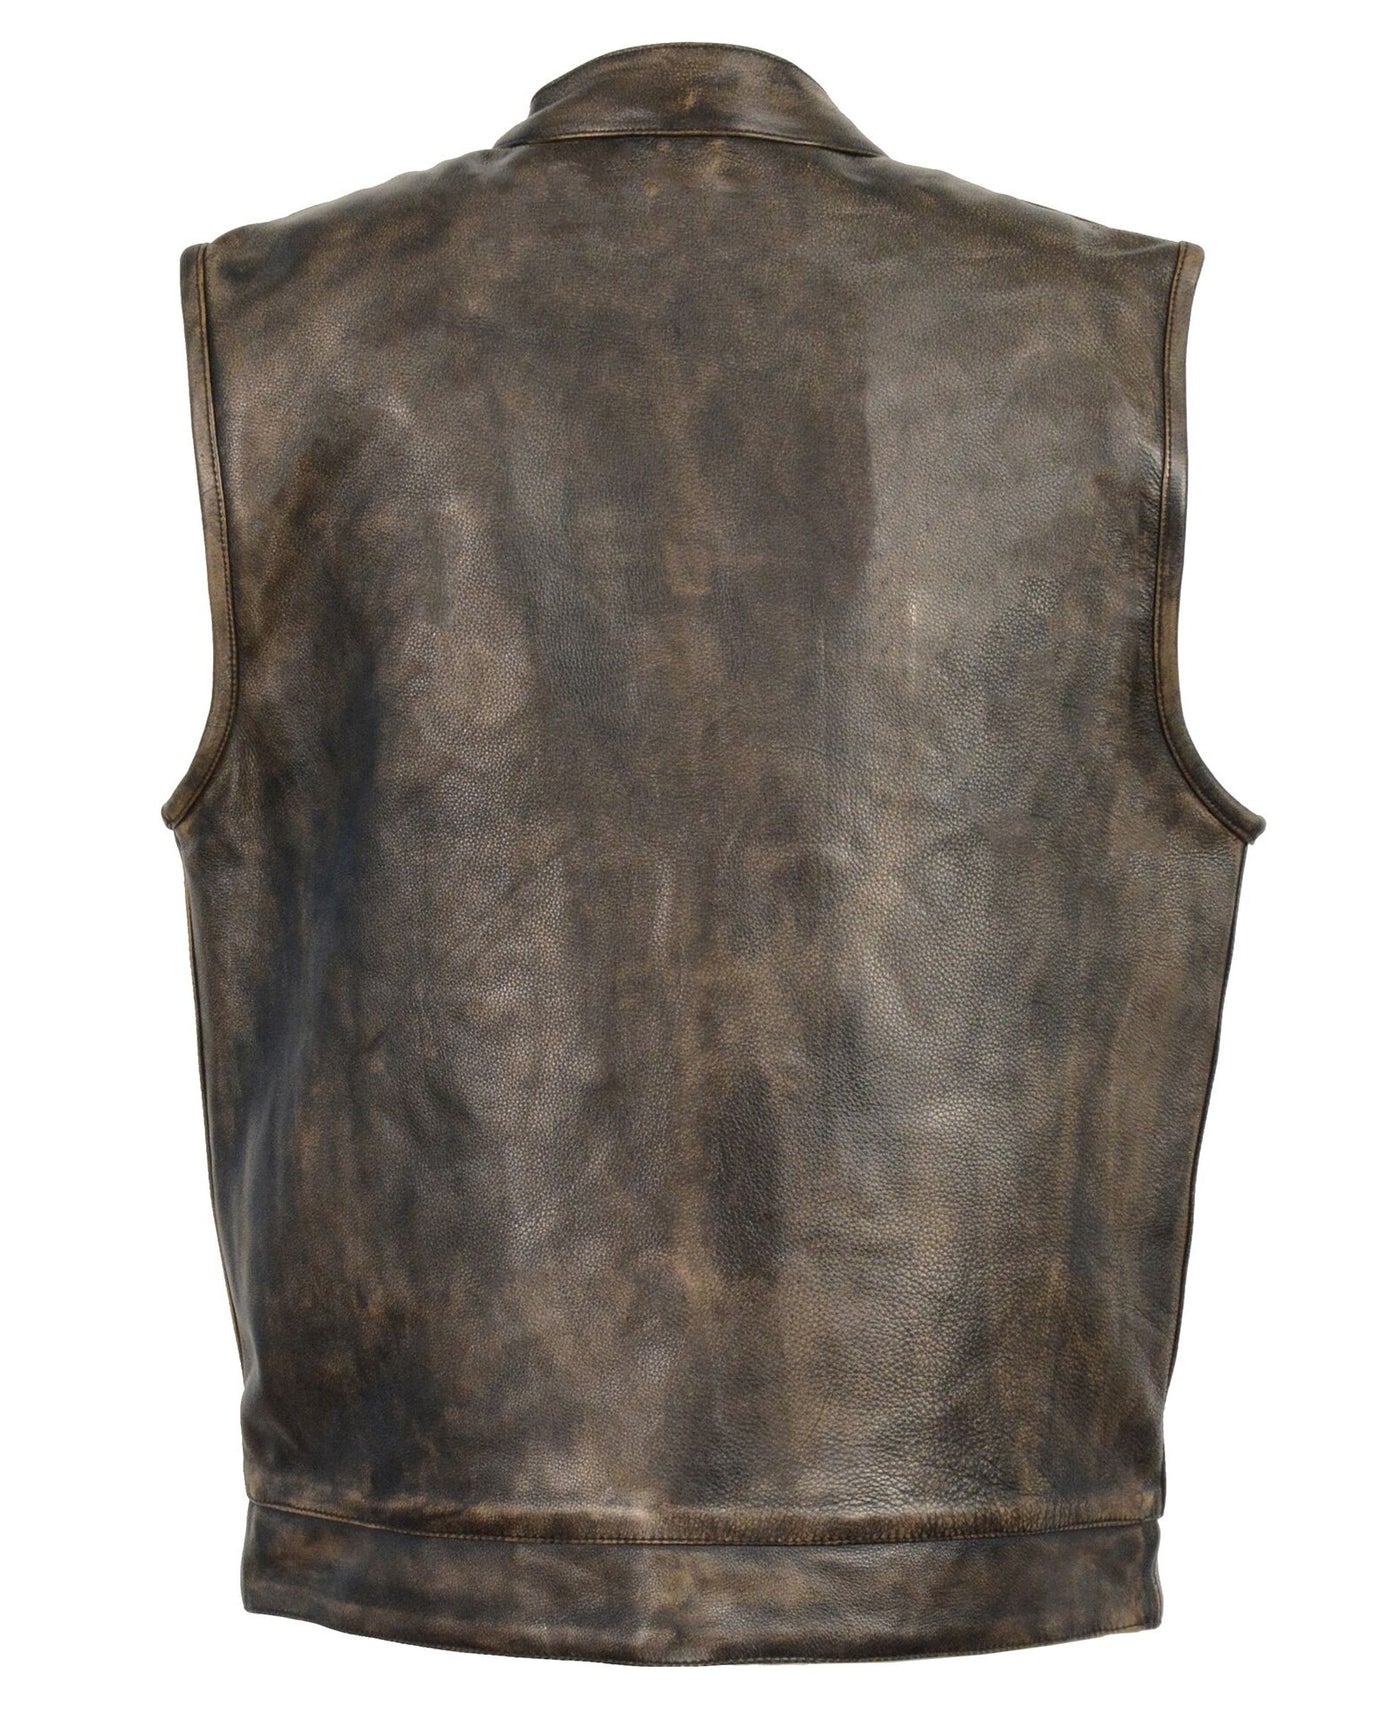 back view of Distressed look brown premium cowhide leather club style riding vest with concealed zipper and snap front closure.  Available for purchase inside our shop in Smyrna, TN, just outside Nashville.  It has inside front conceal carry pockets on each side and has a flap style jean vest style pockets on chest and side closure pockets on lower front. Available in sizes small to 5x